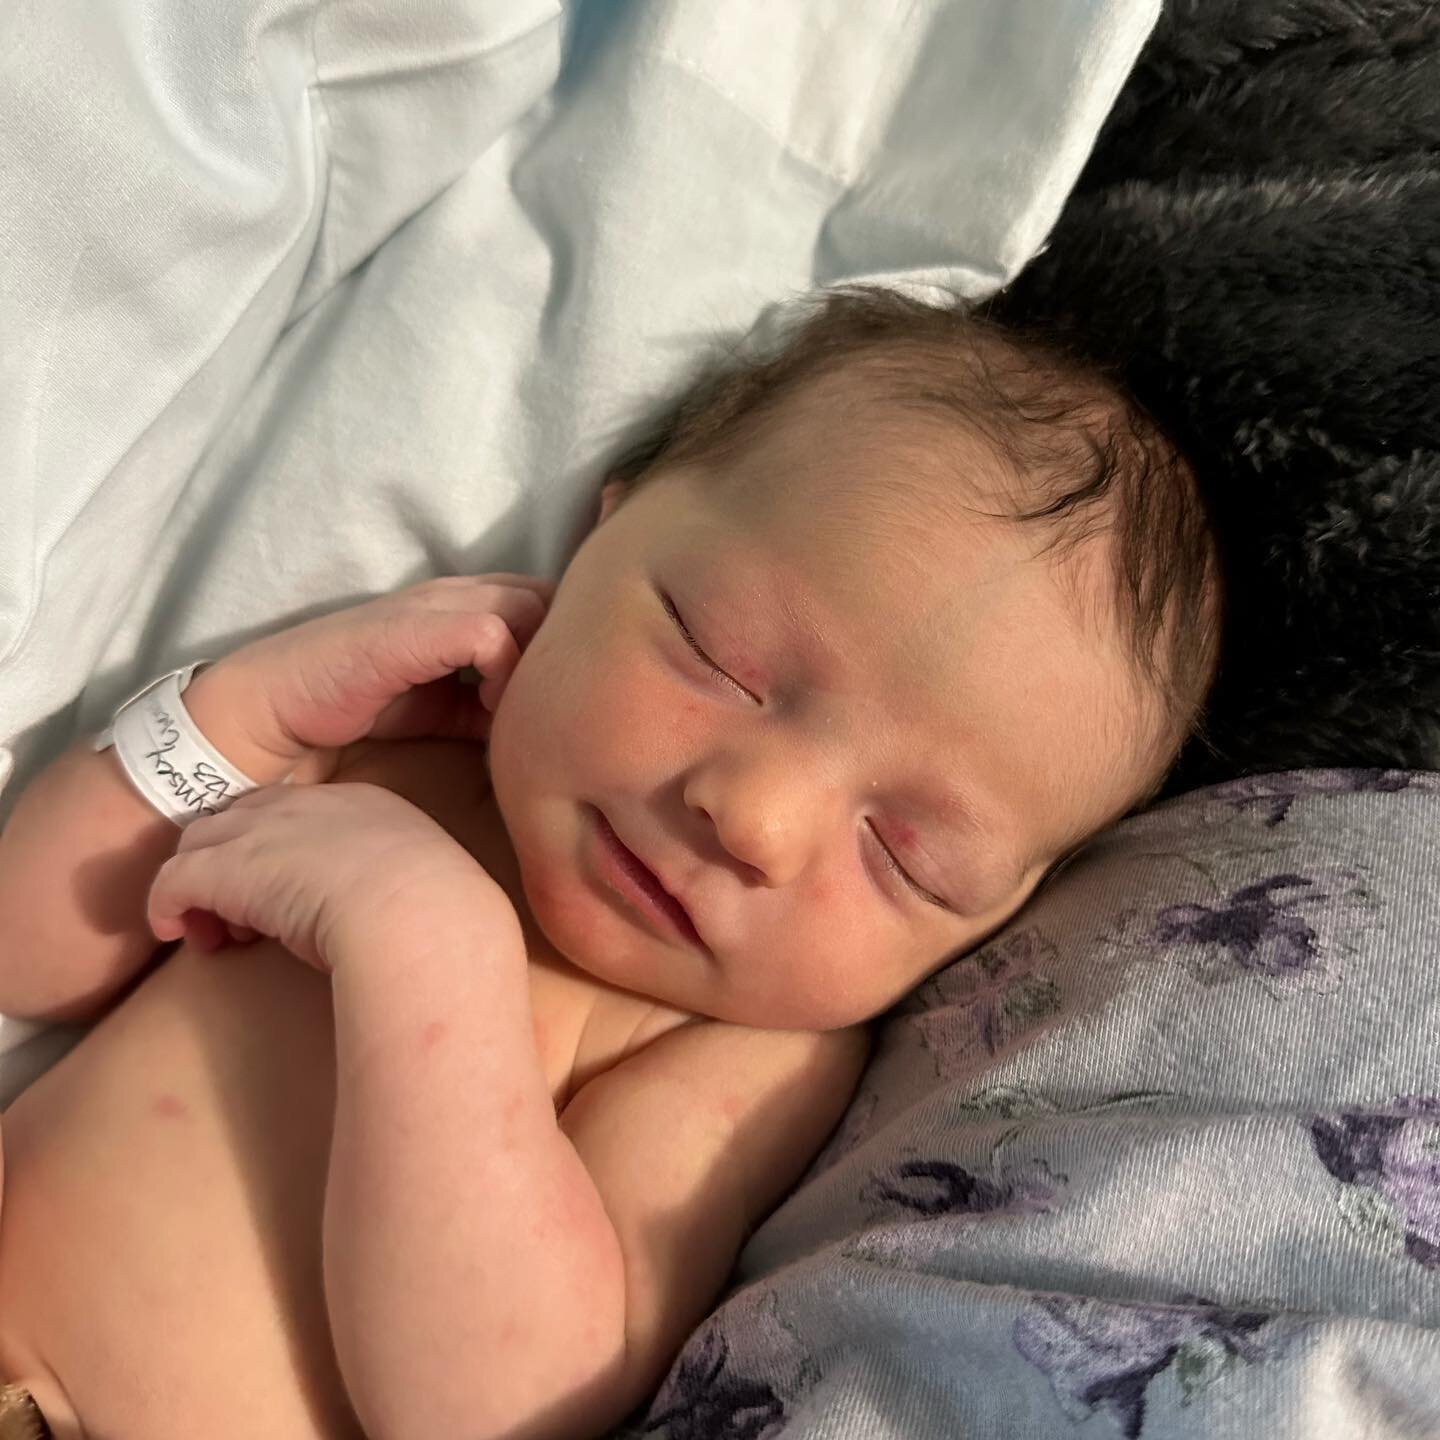 Absolute Pilates Announcement 👶🏻
Olive Jane McLaughlin 
Born on March 2, 2023 at 5:39pm. 
6 lbs, 7 oz, 18.5 inches long. 🥰❤️😍🎀